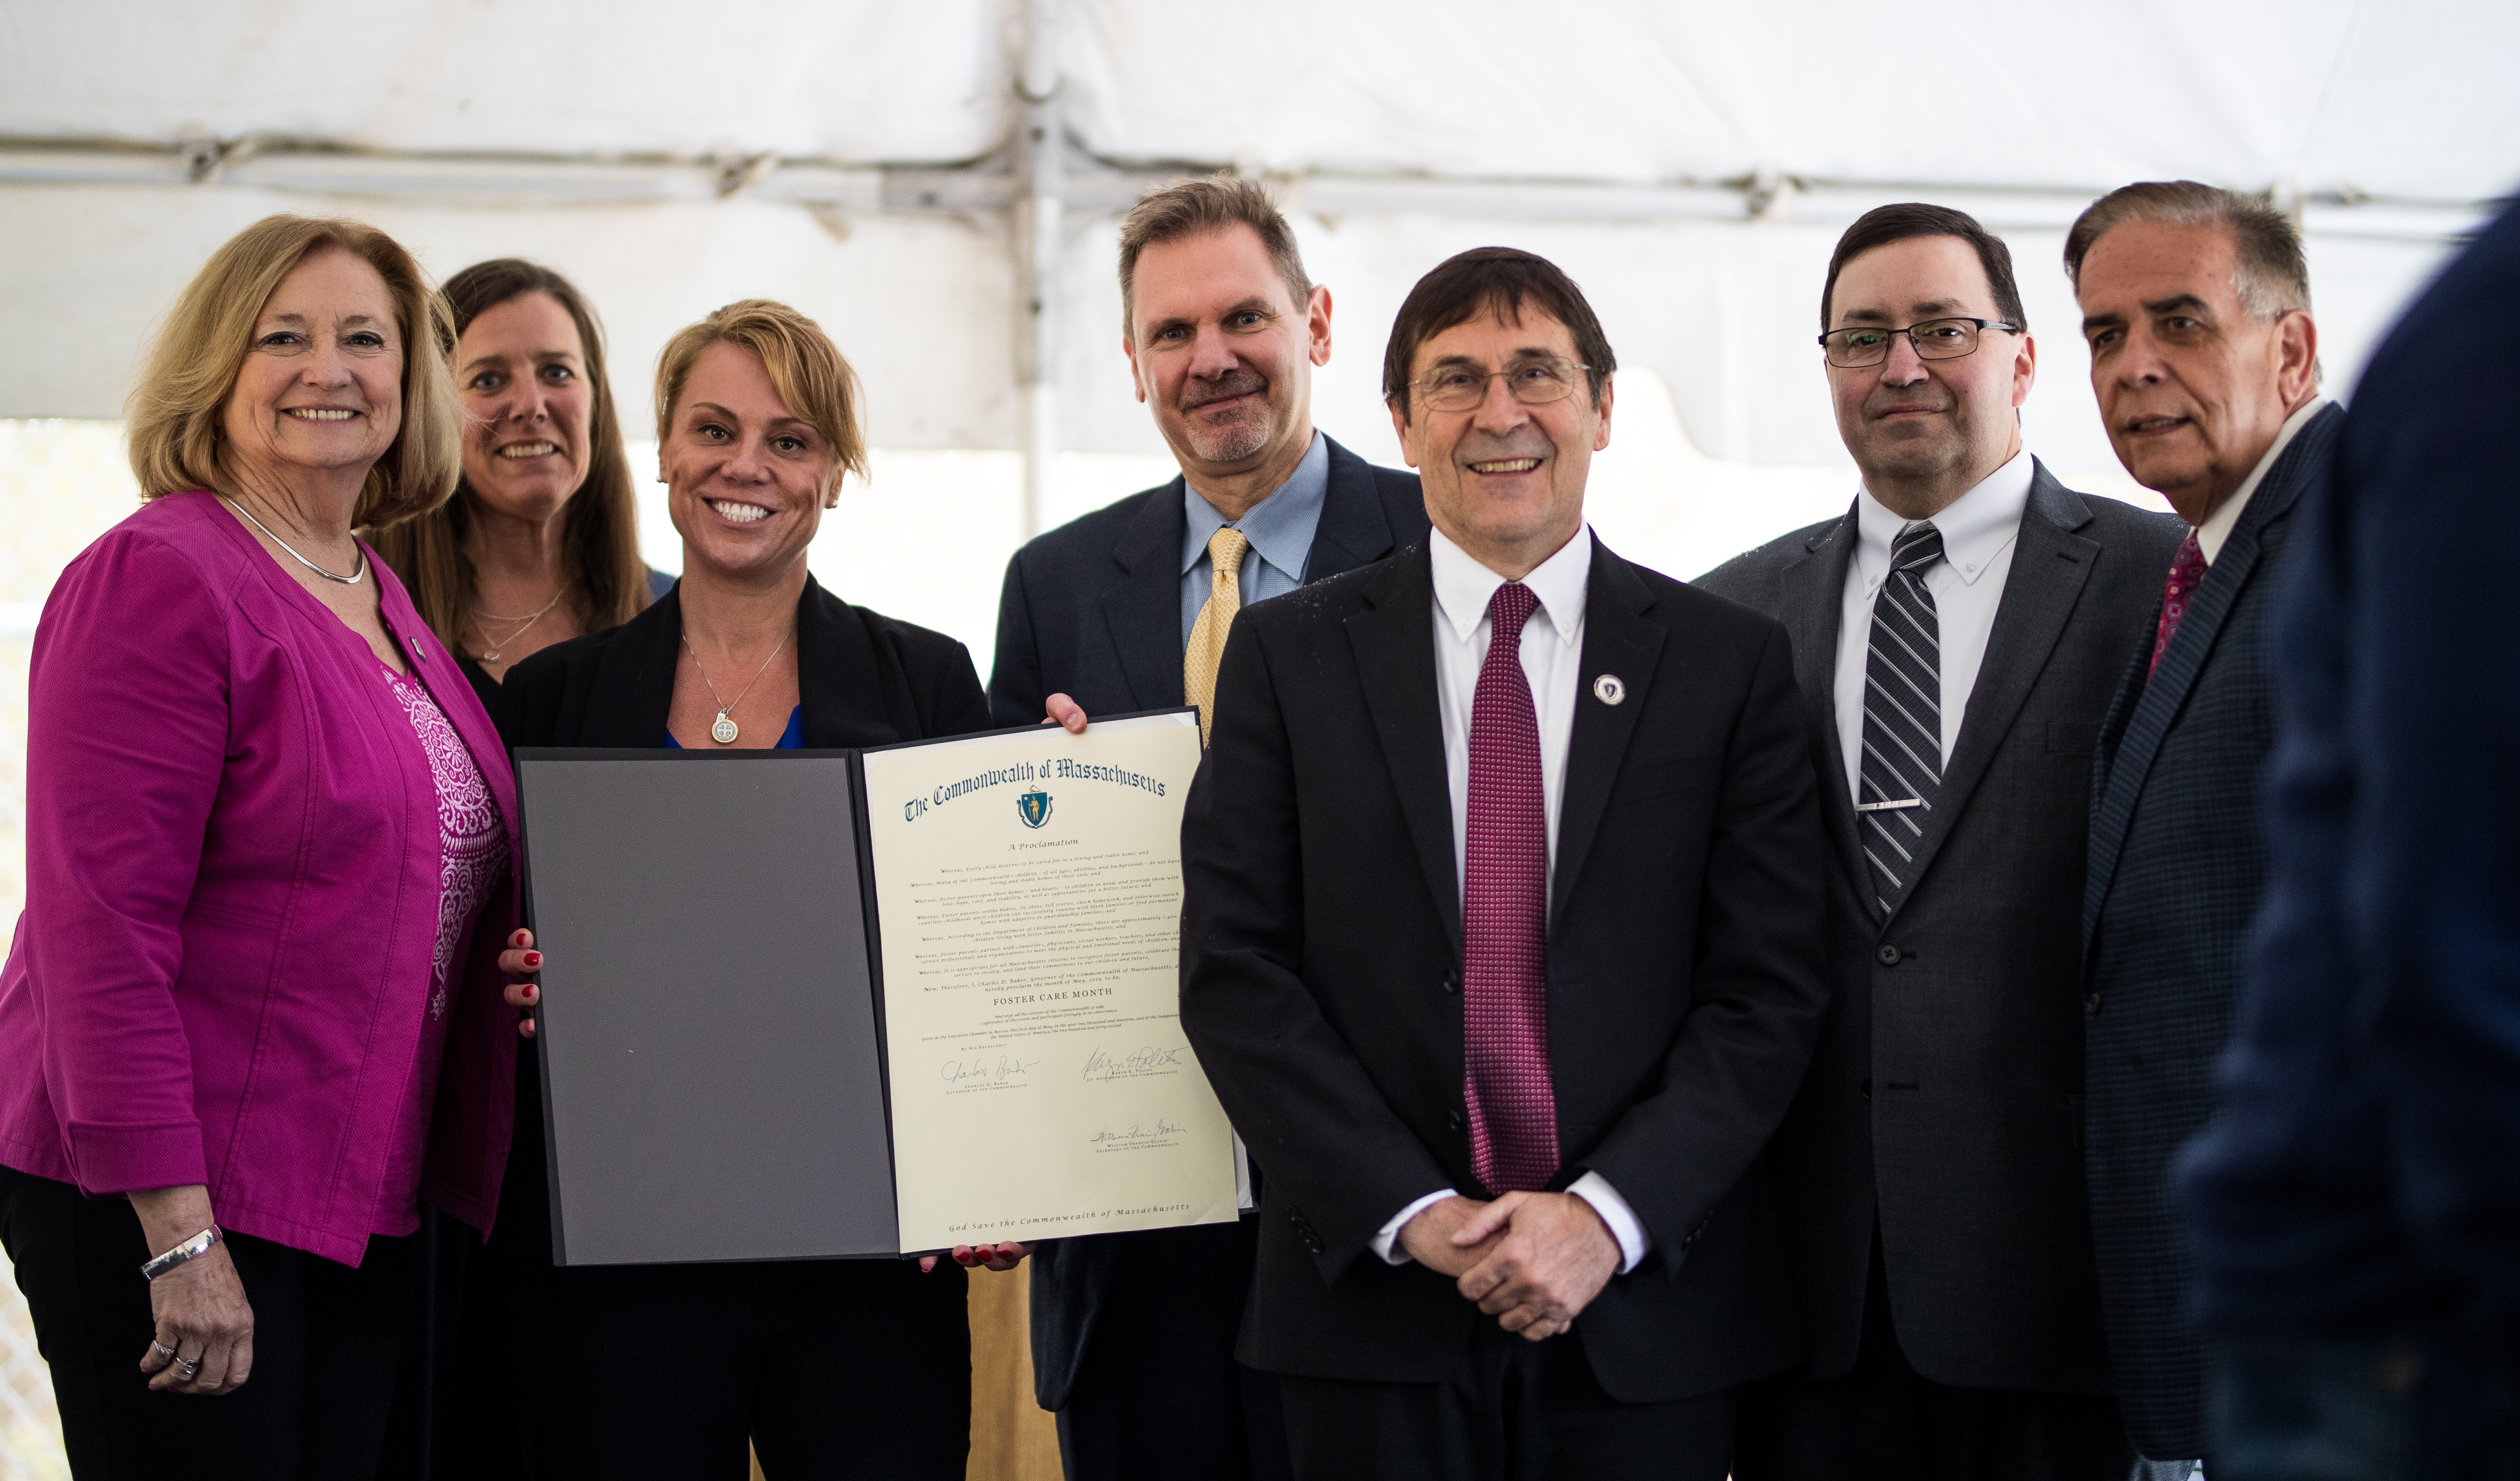 A group of JRI employees and legislatures pose for a group photo with the proclamation